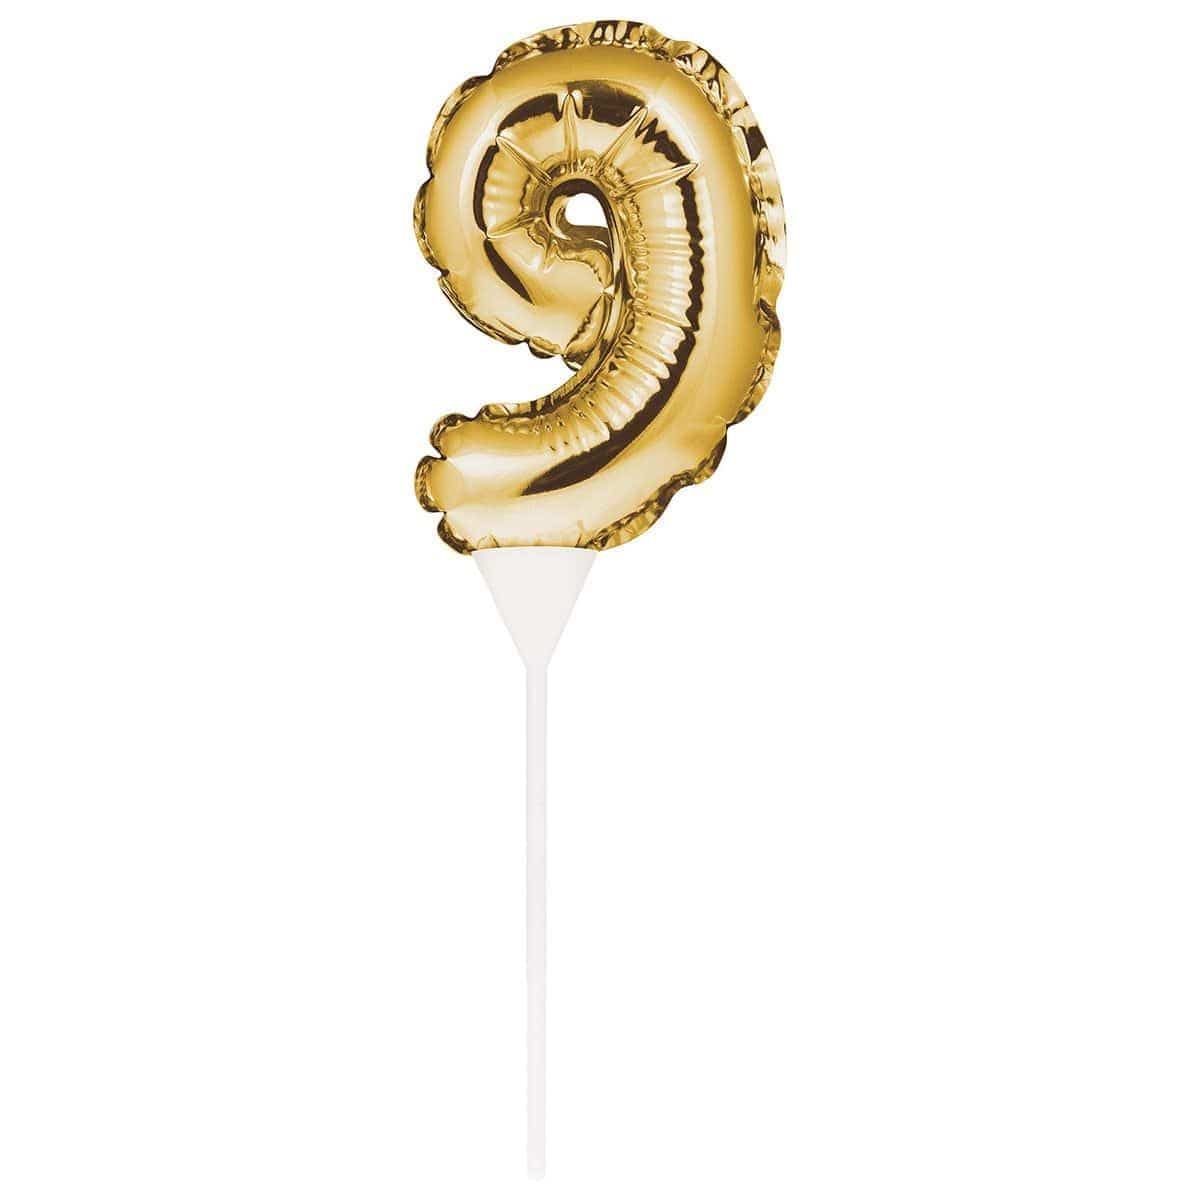 Buy Cake Supplies Balloon Cake Topper - #9 - Gold sold at Party Expert